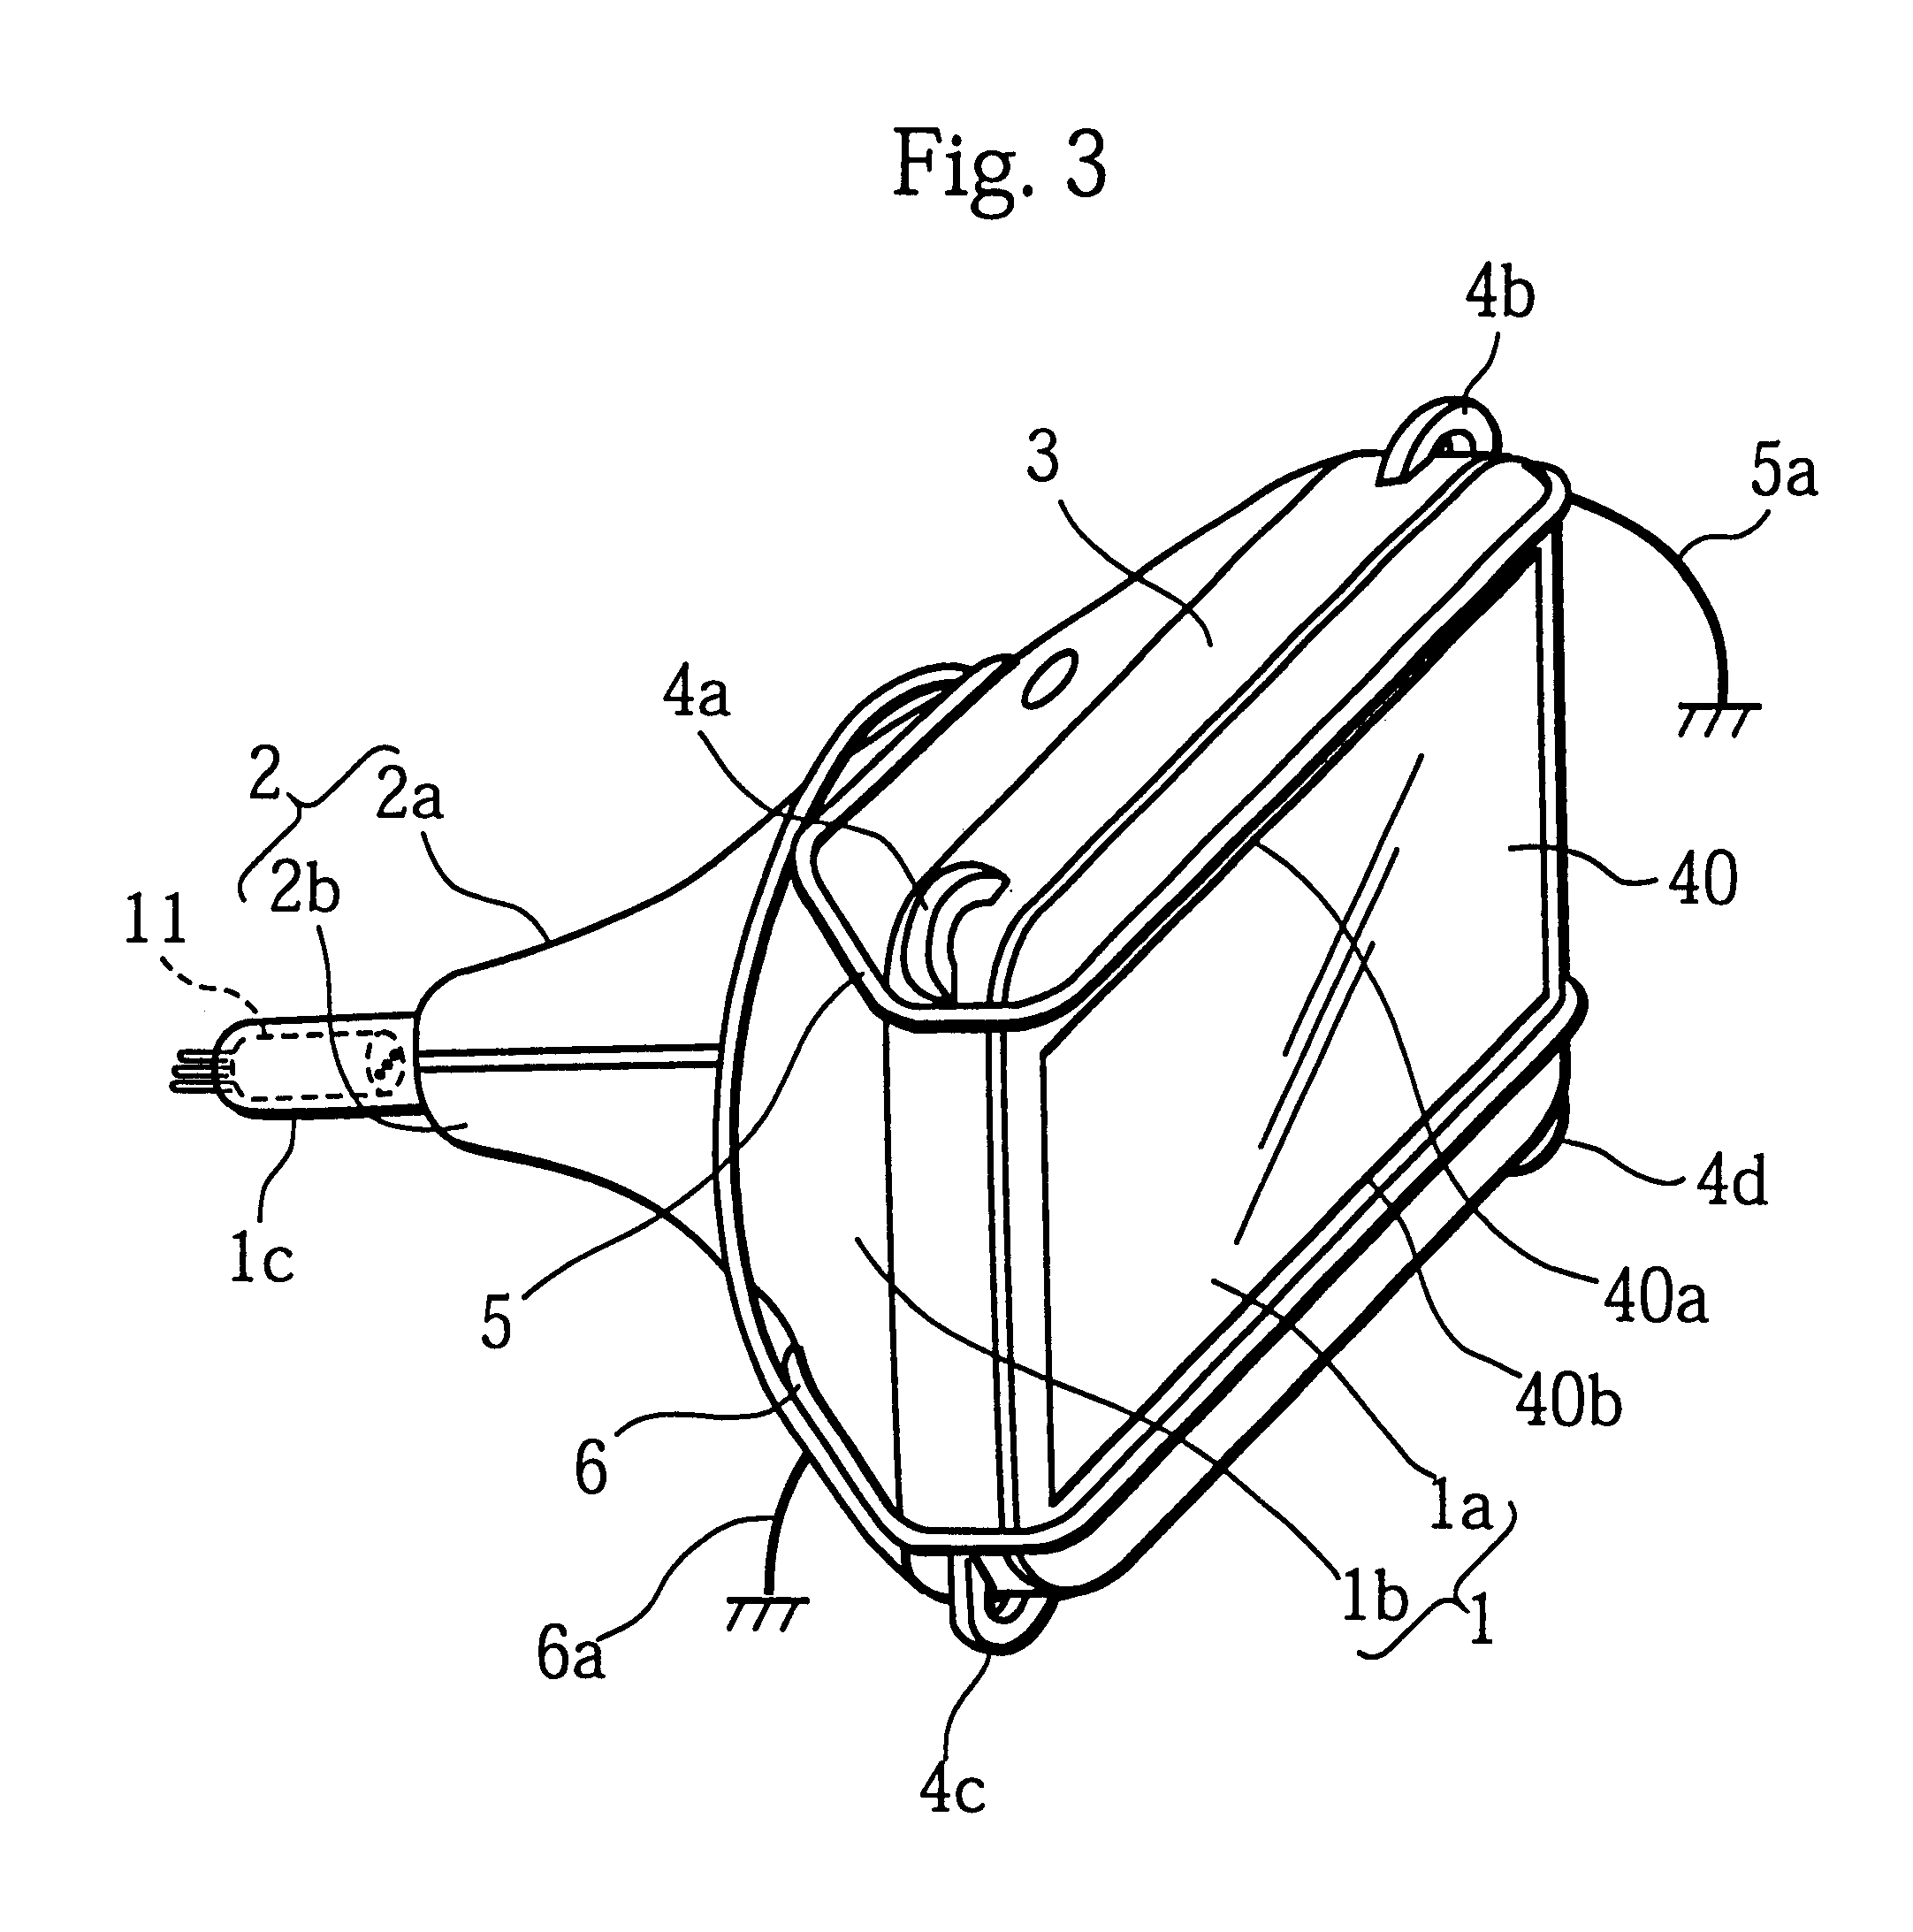 Cathode ray tube device that reduces magnetic field leakage